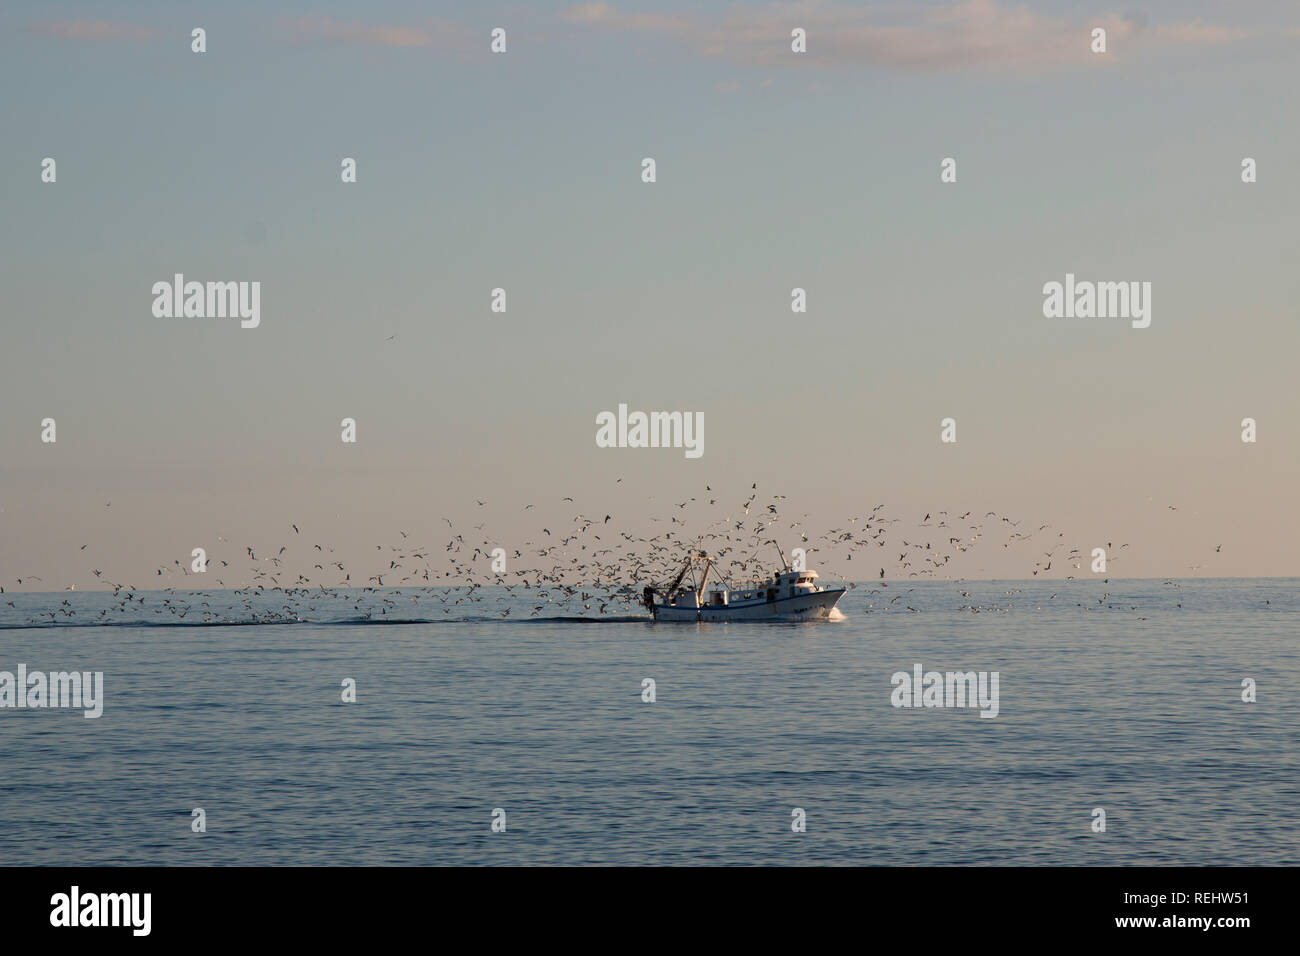 A fishing boat comes into dock with seagulls all around Stock Photo